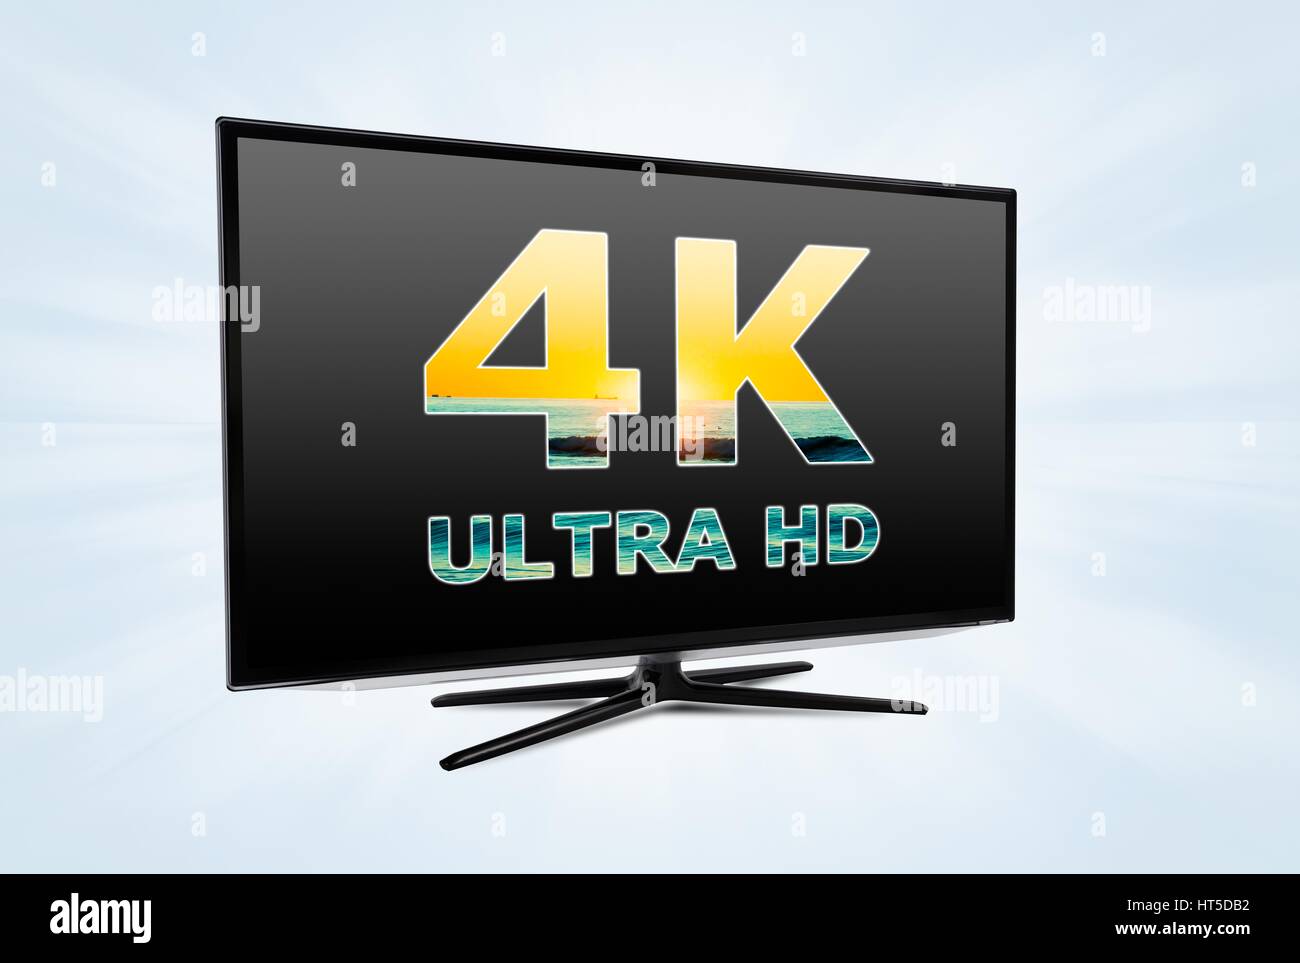 Ultra high definition digital television screen technology Stock Photo